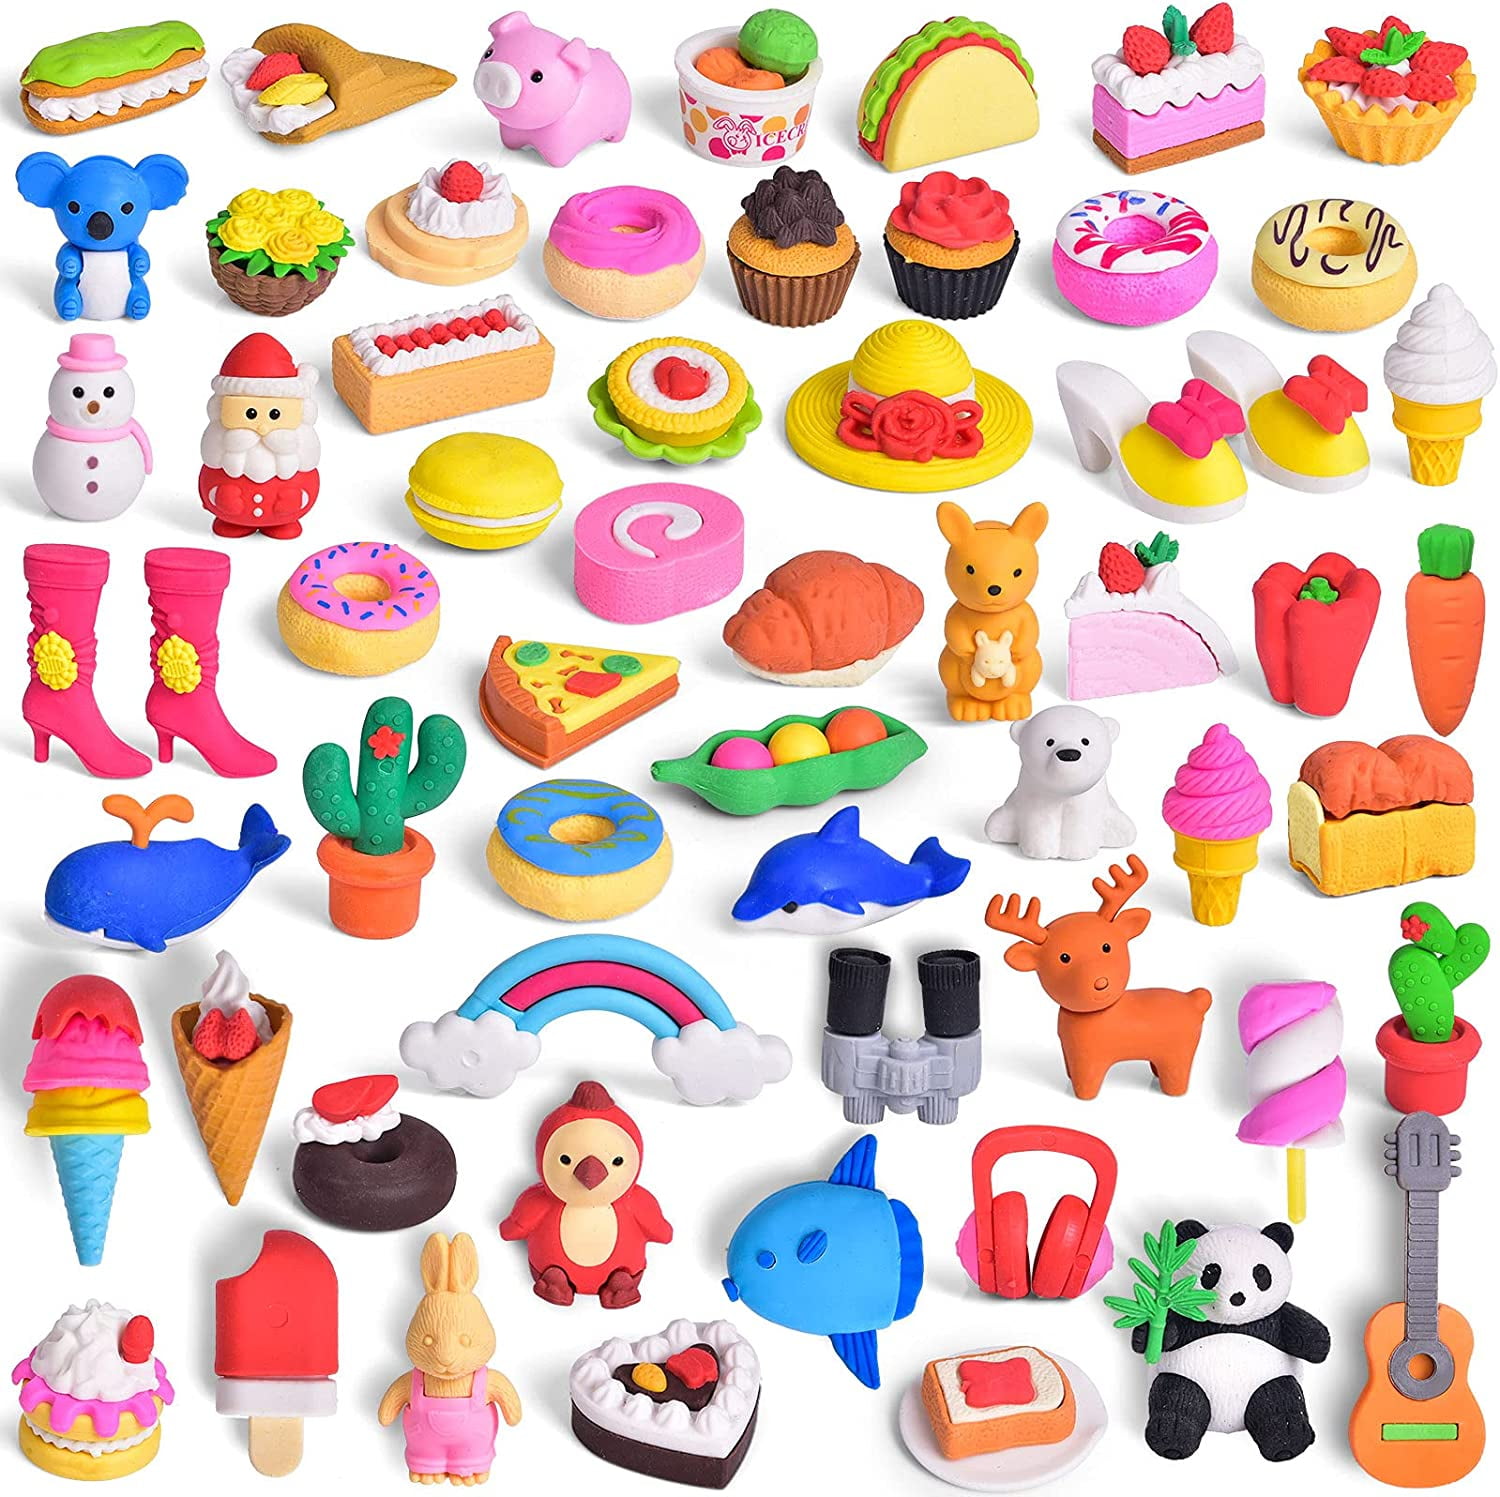 Cute Assorted Erasers Best For Birthday Gifts /goody Bags 